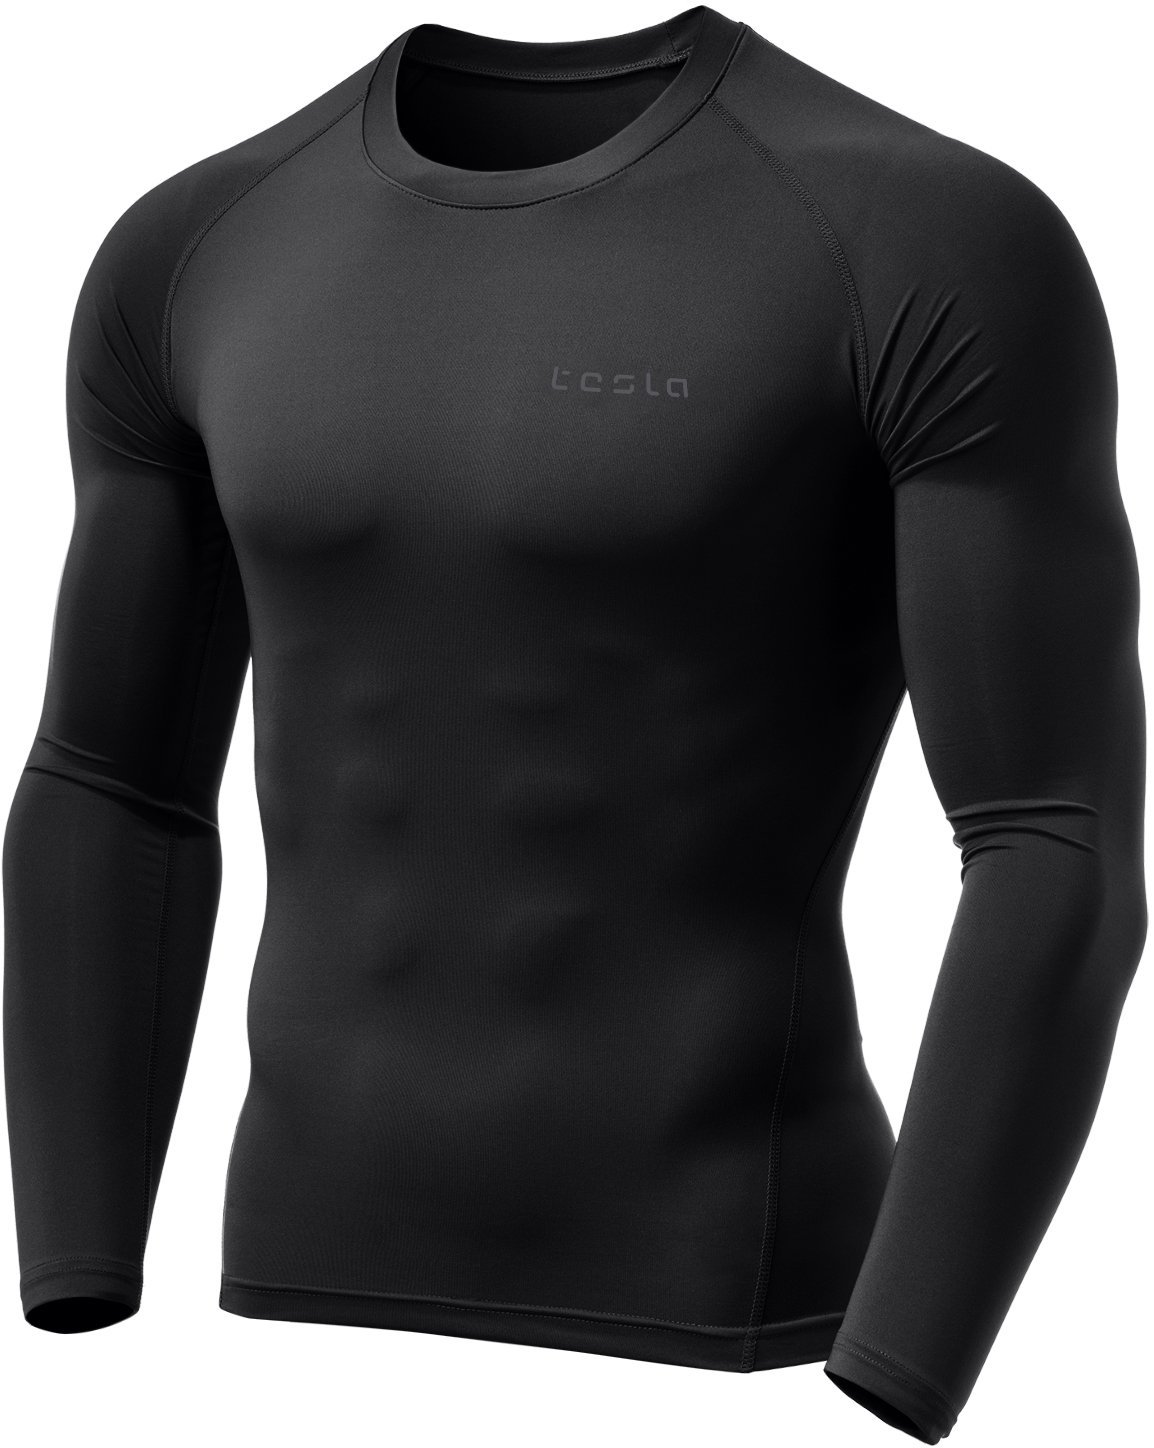  TSLA Men's Thermal Long Sleeve Compression Shirts,  Mock/Turtleneck Winter Sports Running Base Layer Top, Heatlock Mock Neck  Black, X-Small : Clothing, Shoes & Jewelry